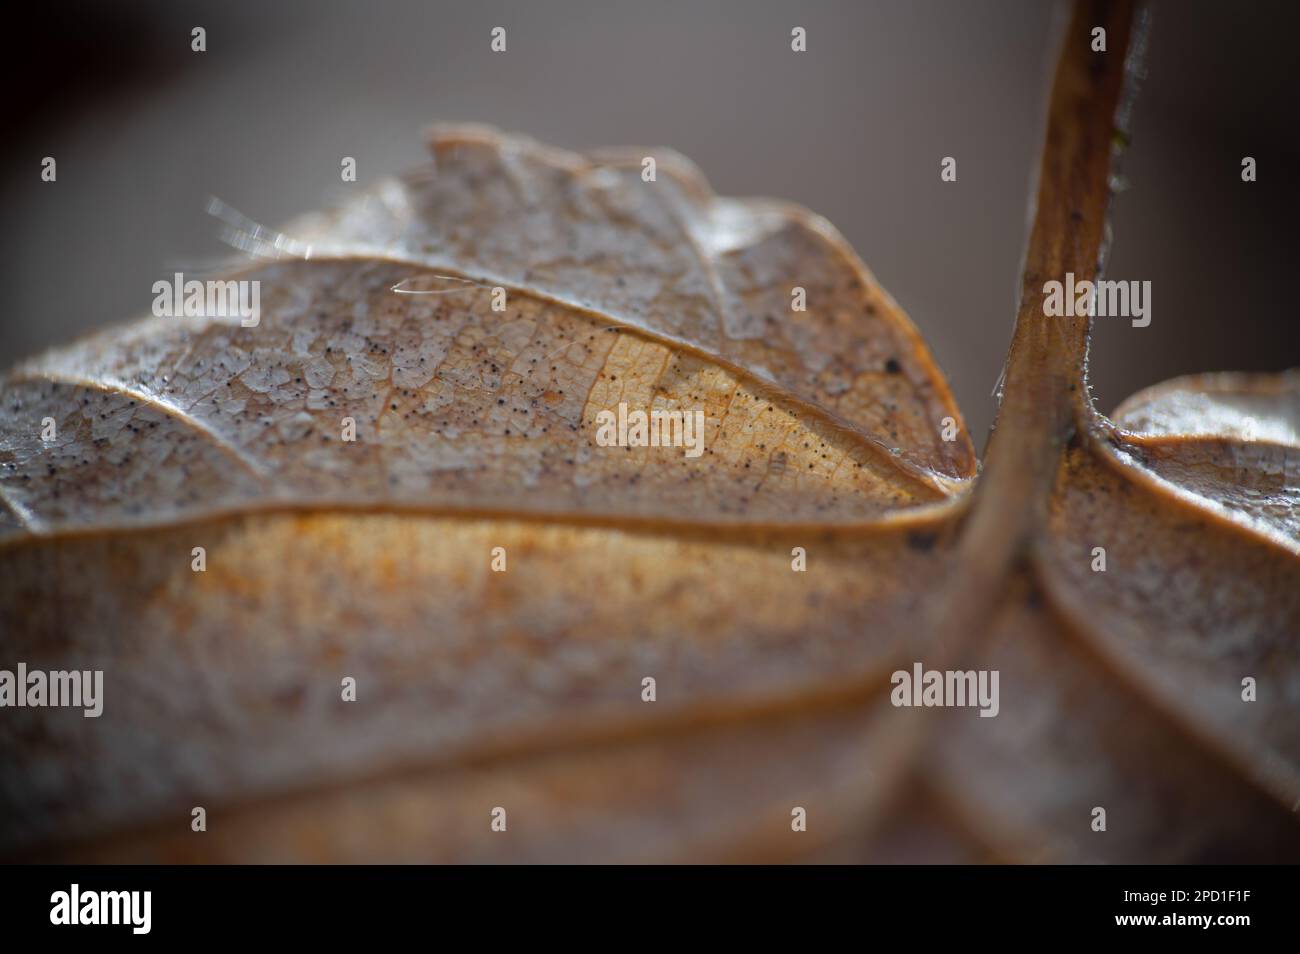 Extreme close-up photo of a brown leaf. Shallow depth of field. Stock Photo